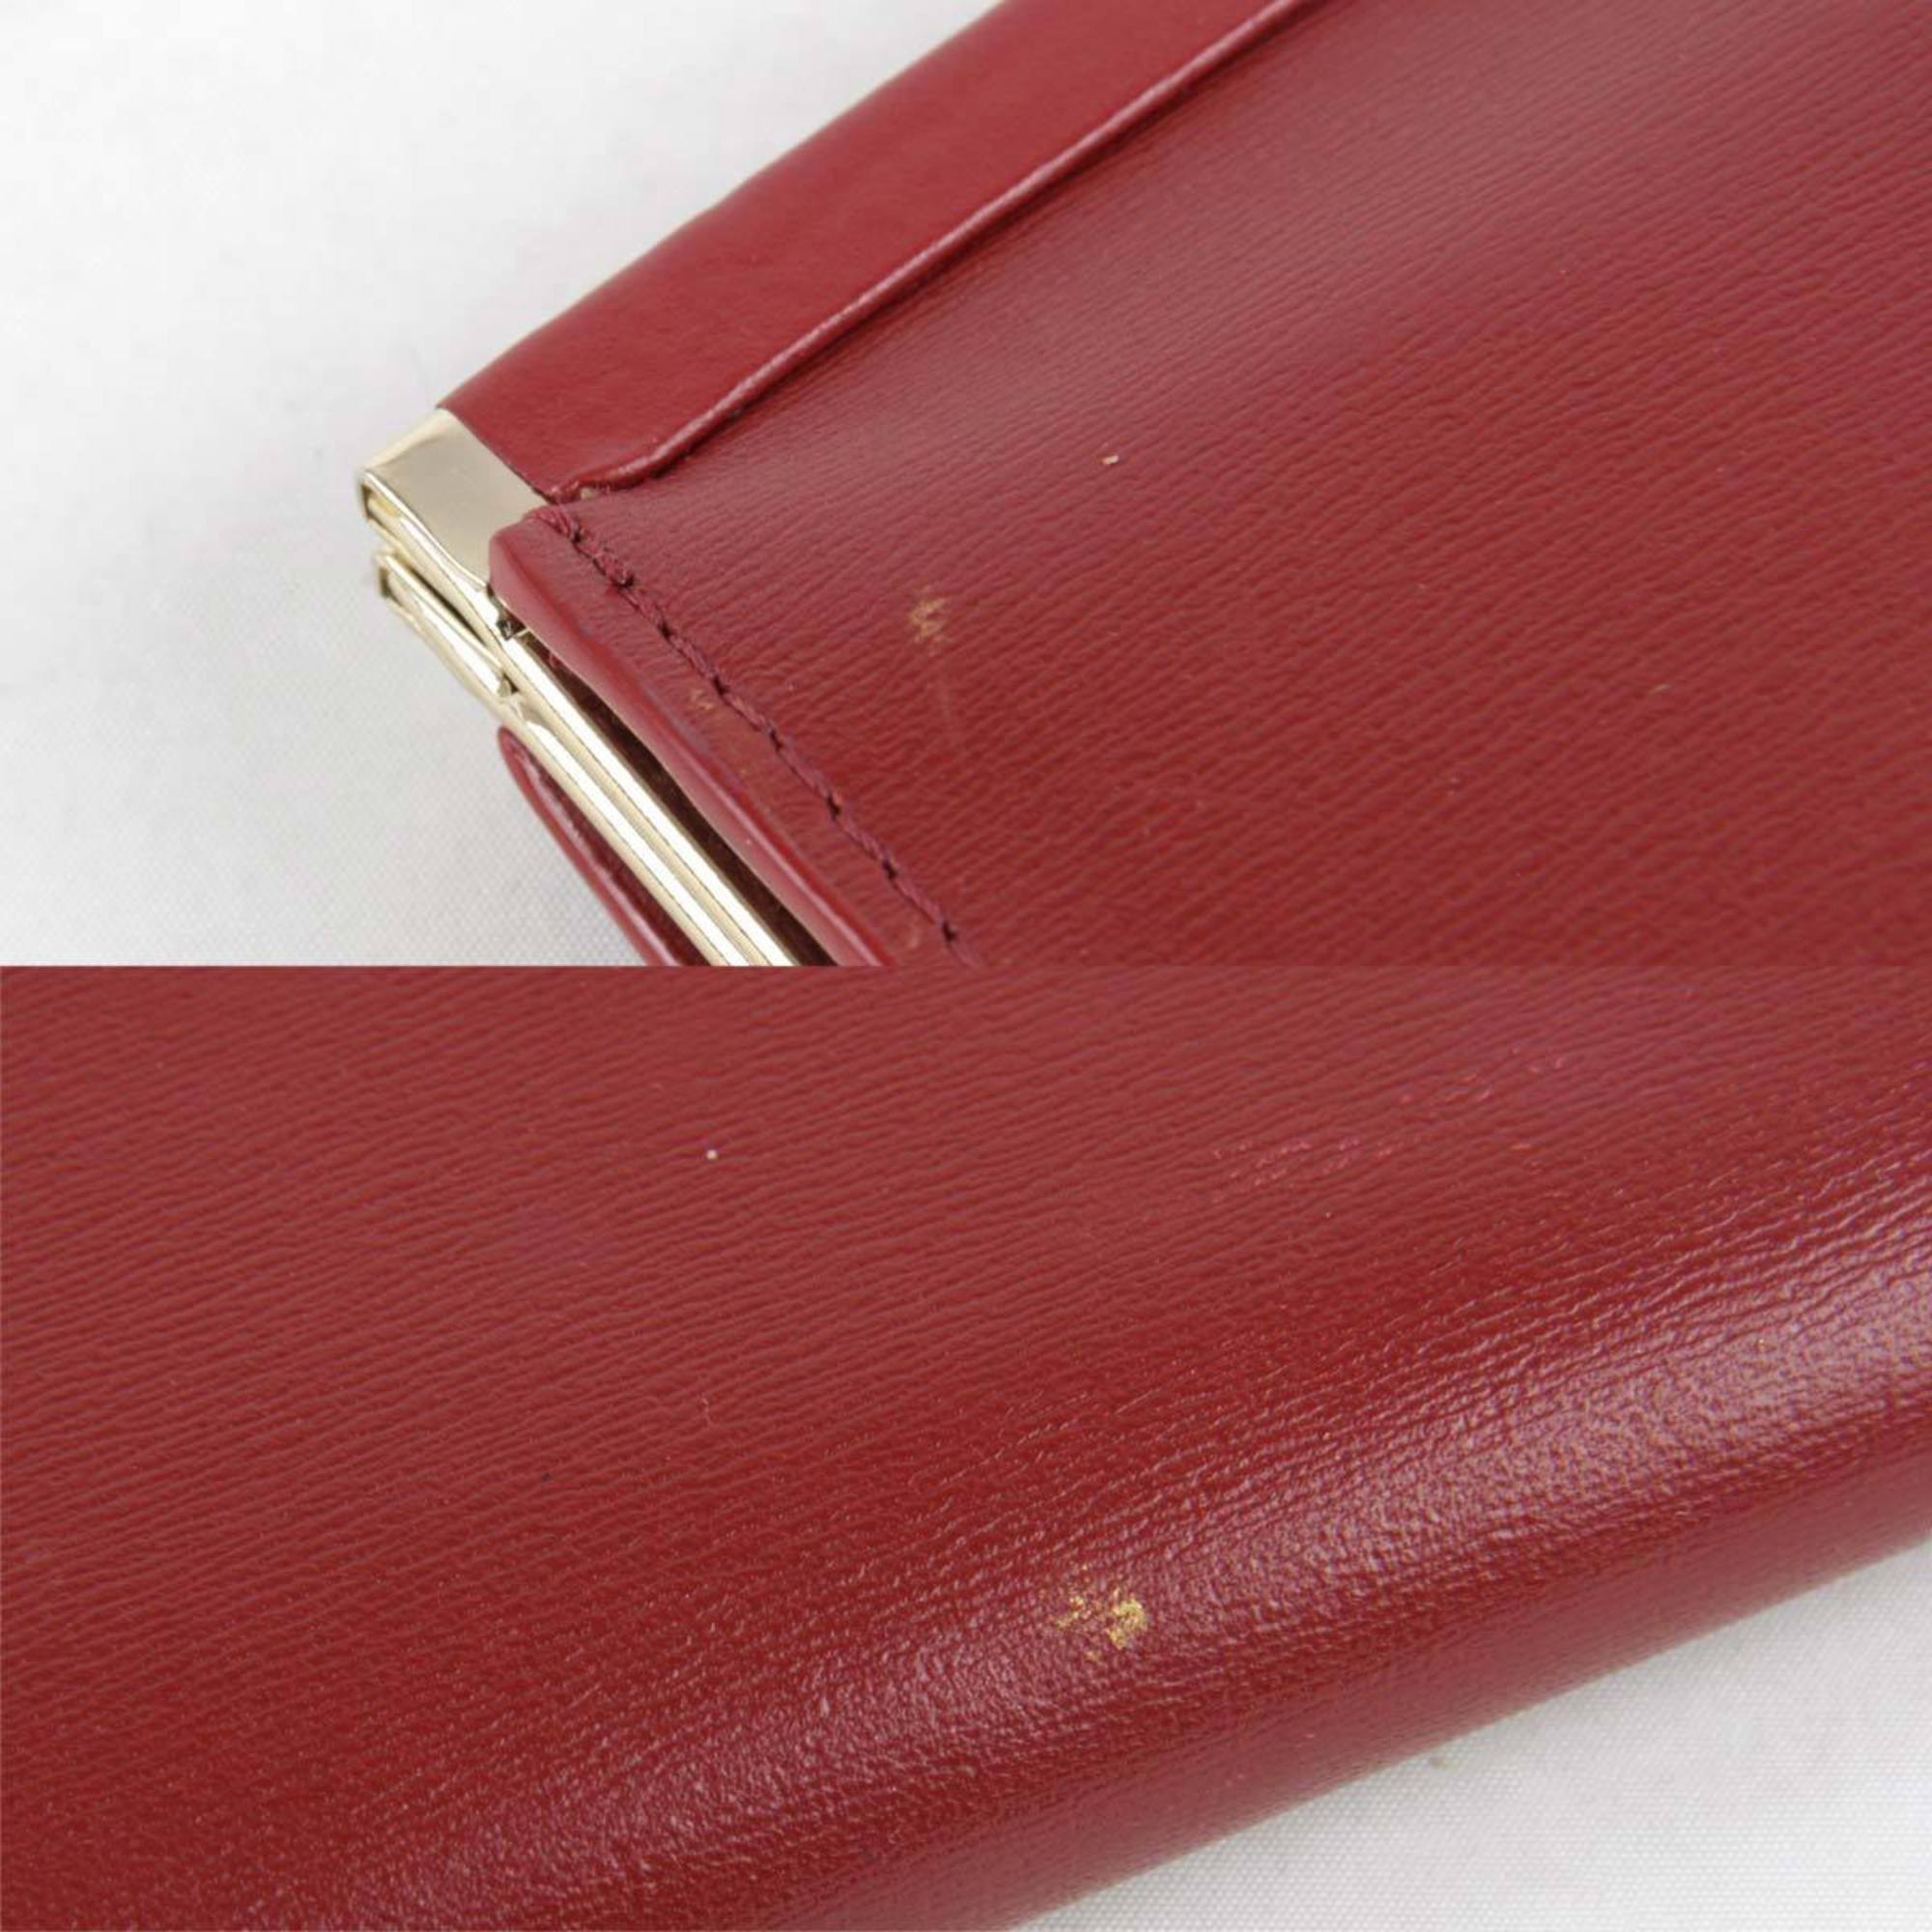 Paul Smith Long Wallet Leather Red Women's